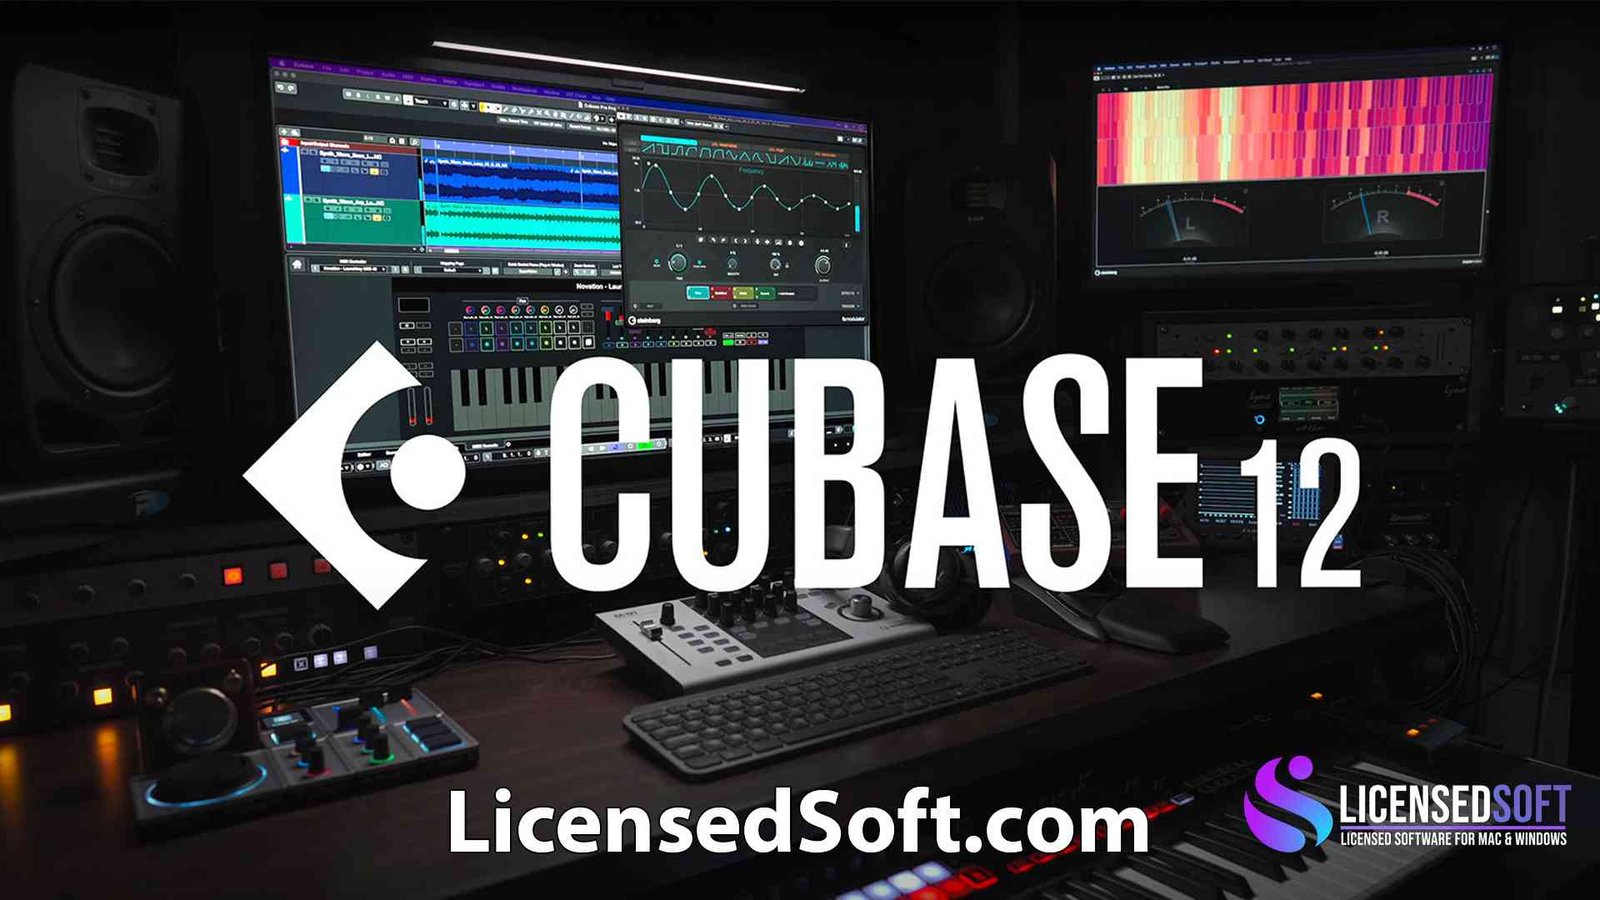 Steinberg Cubase Pro 12.0.70 Full Version Cover Image By LicensedSoft